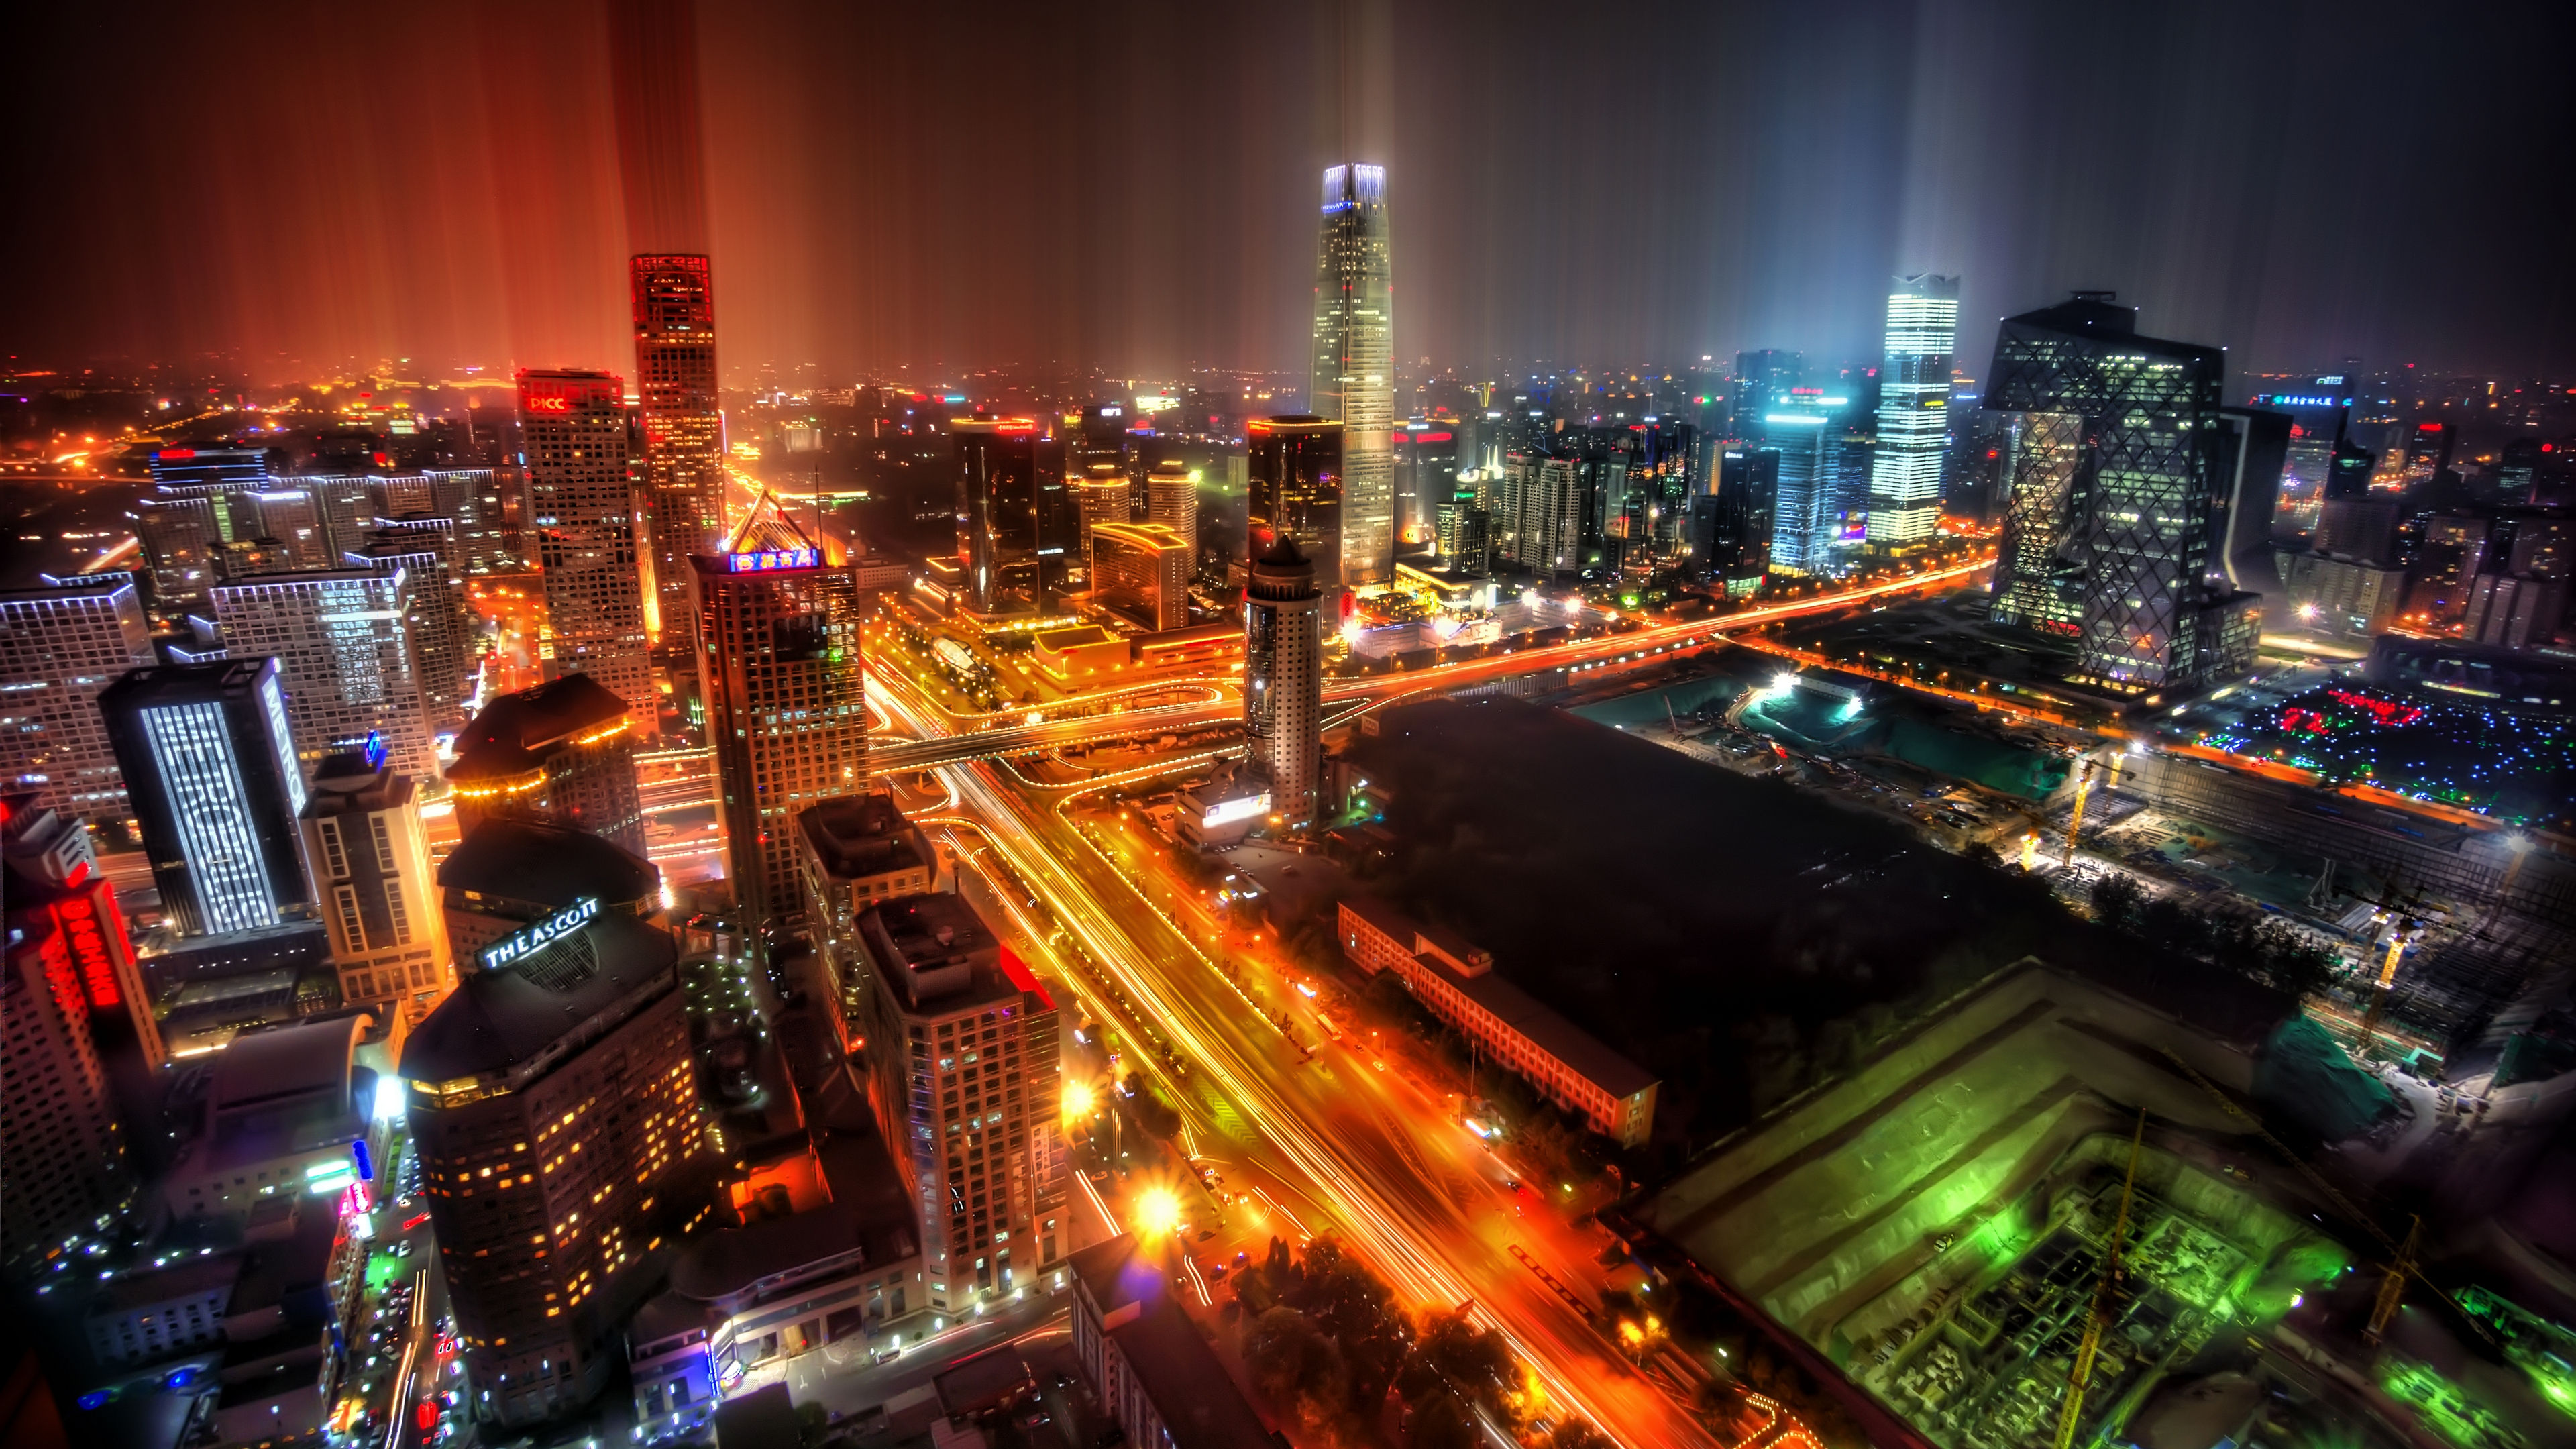 General 3840x2160 China photography Trey Ratcliff Beijing city city lights night building cityscape architecture